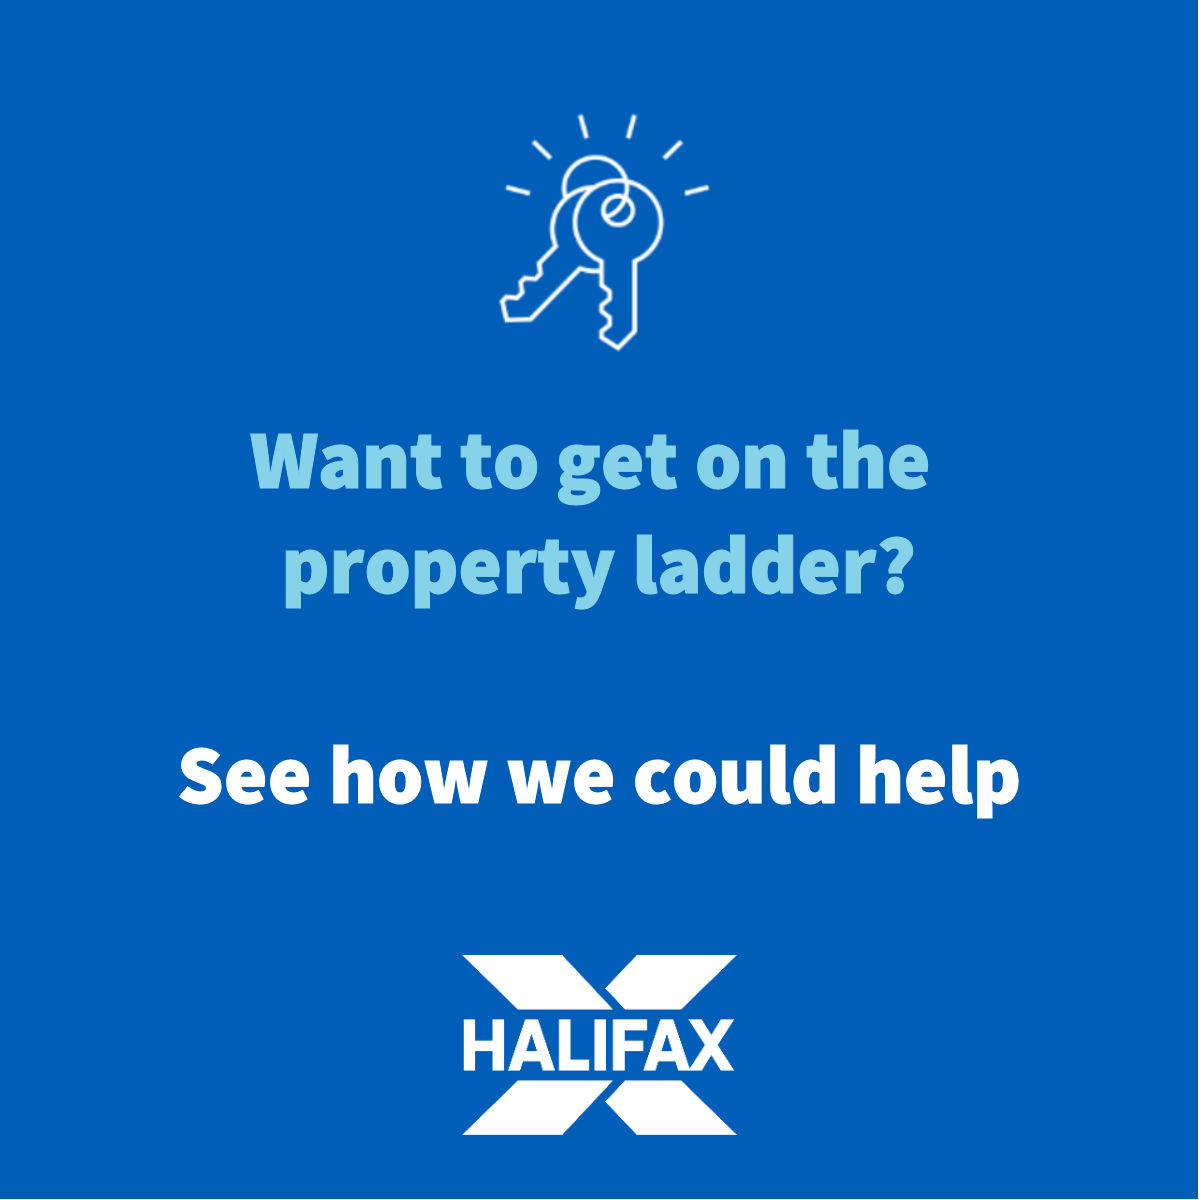 We support a range of Government backed home initiatives, so if you’re a first time buyer see how we could help you. spr.ly/6012XsvkY